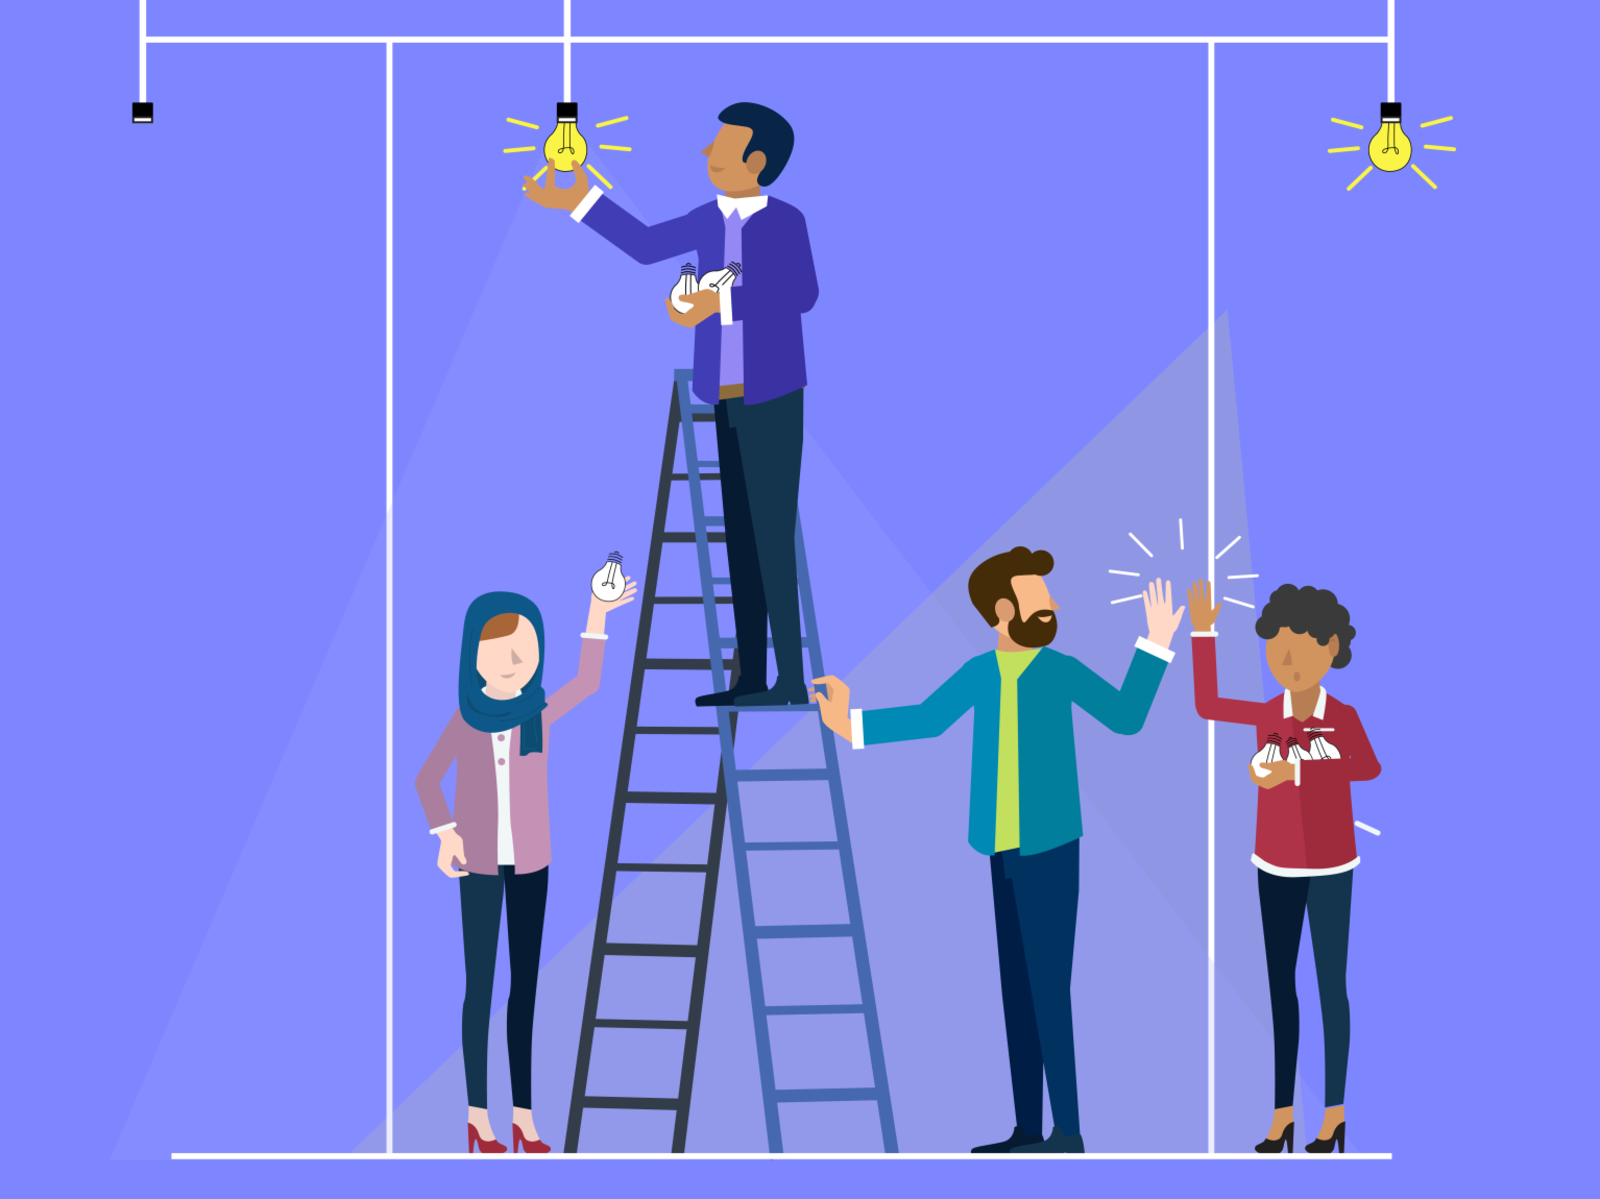 Effective Teamwork - Animated by DapperPixel on Dribbble